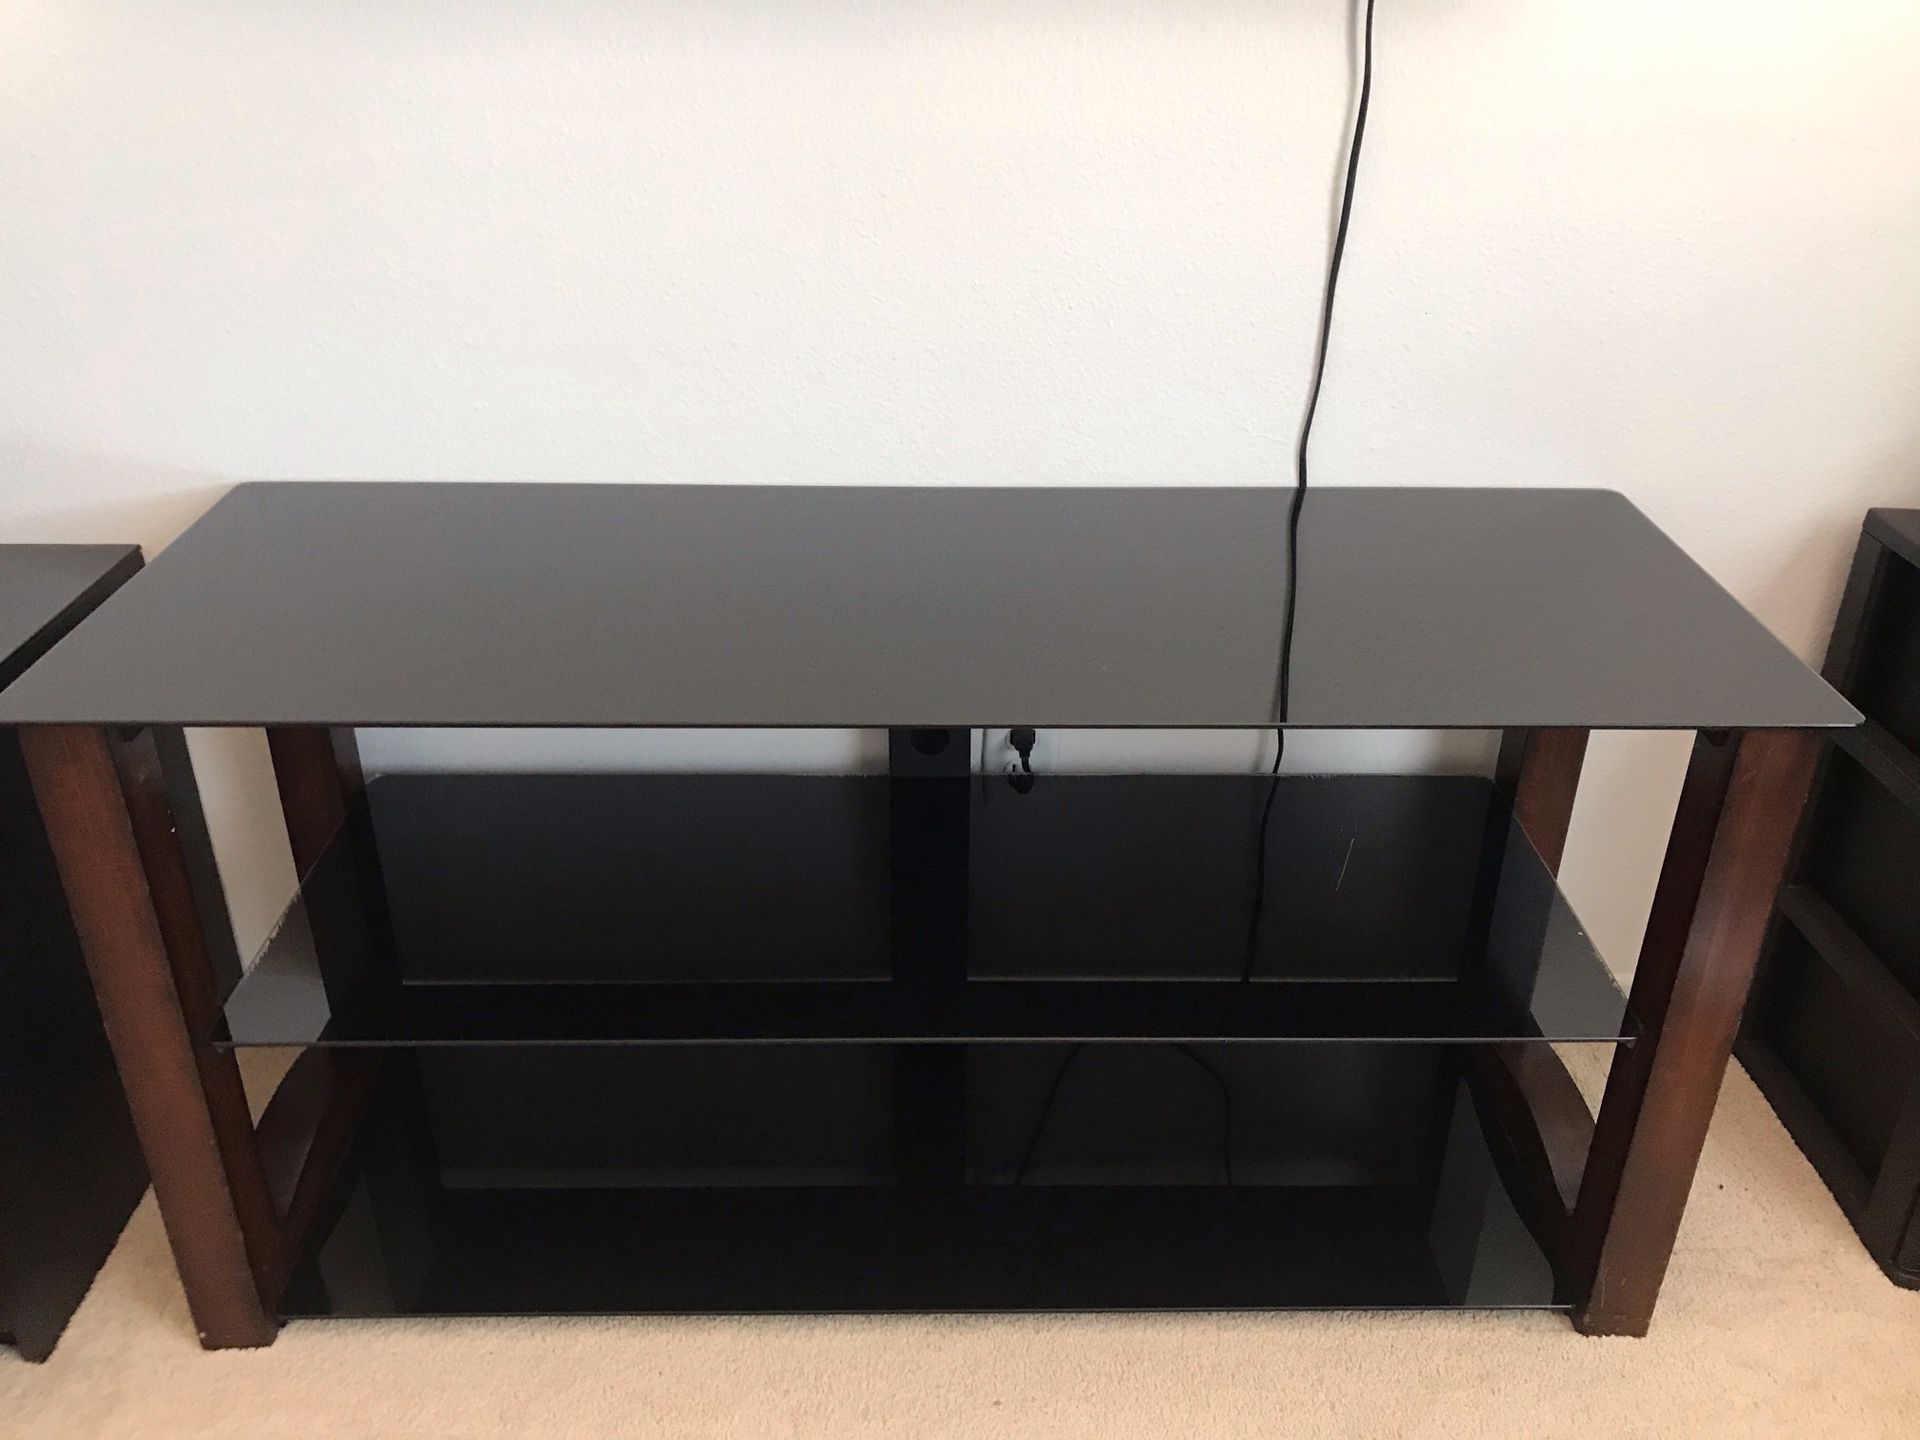 TV stand w/glass shelves